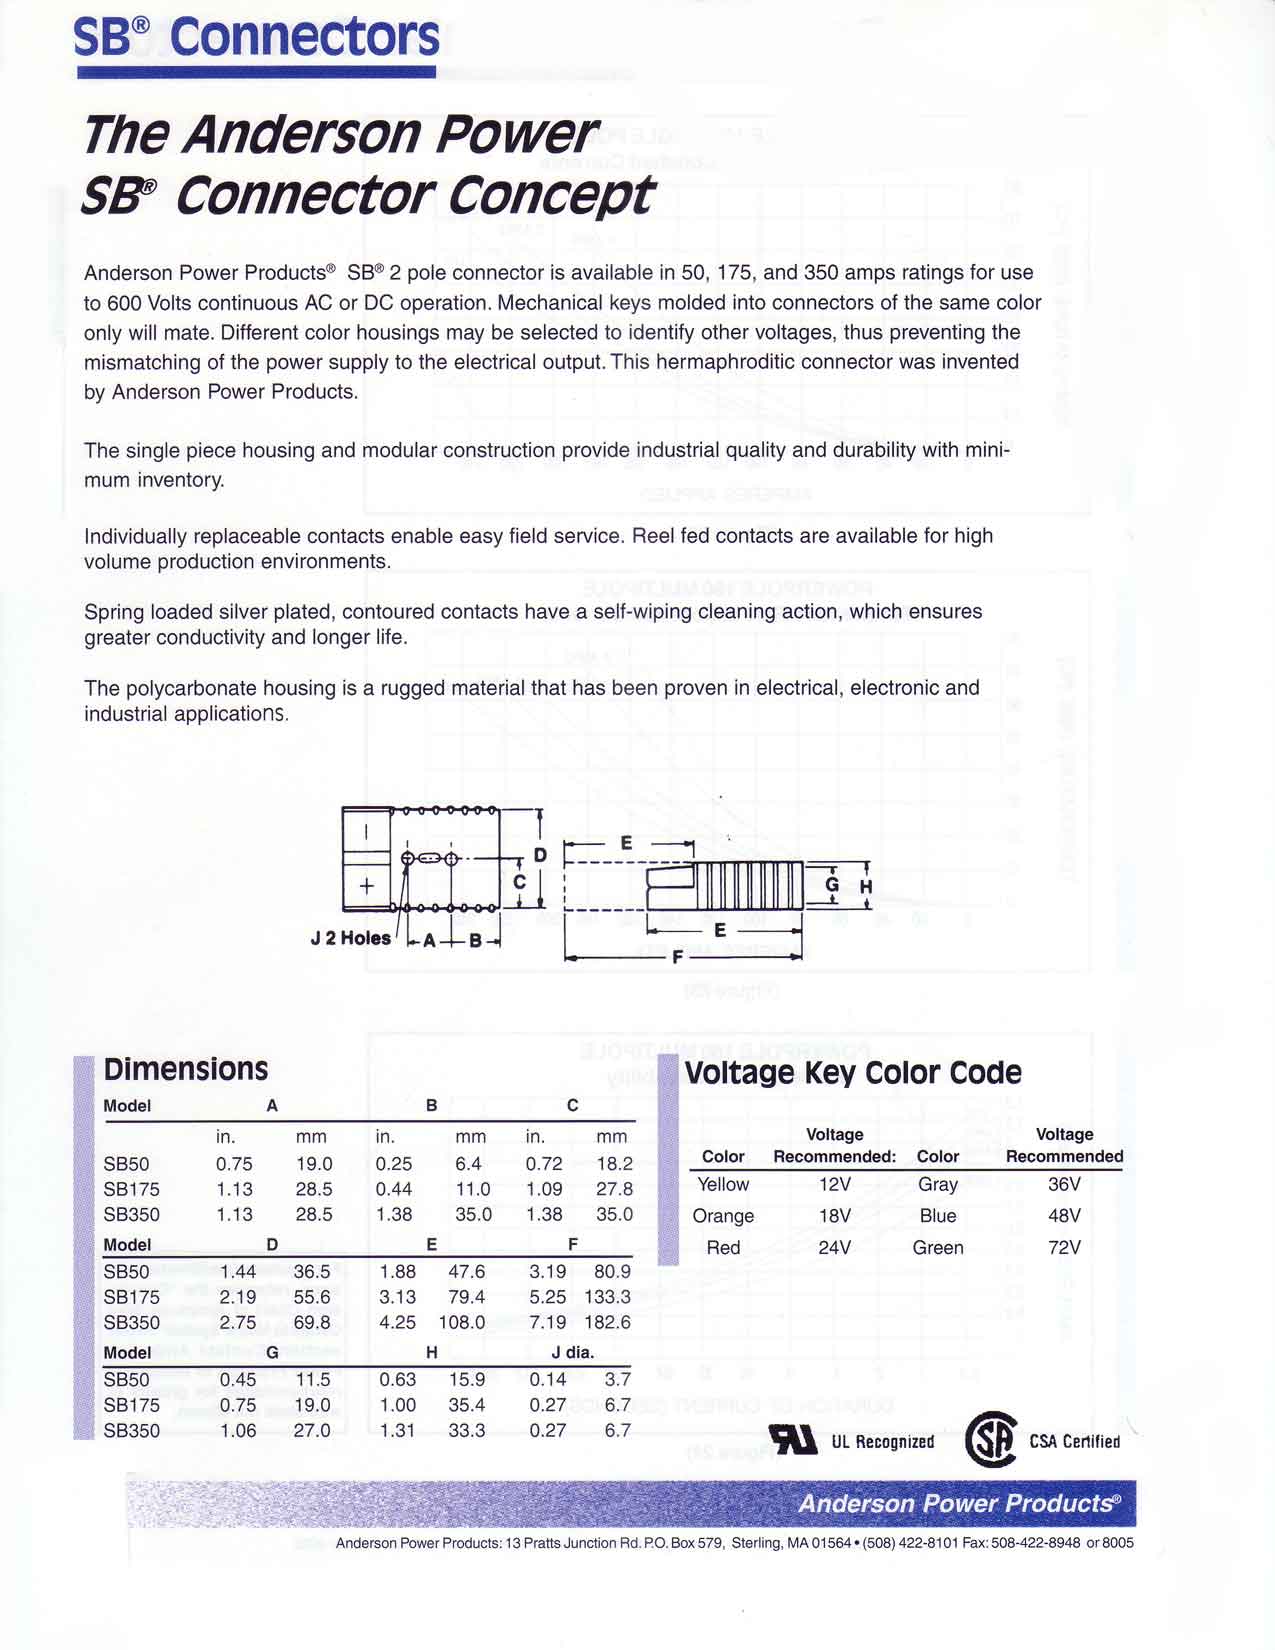 SB connectors, Anderson Power Products